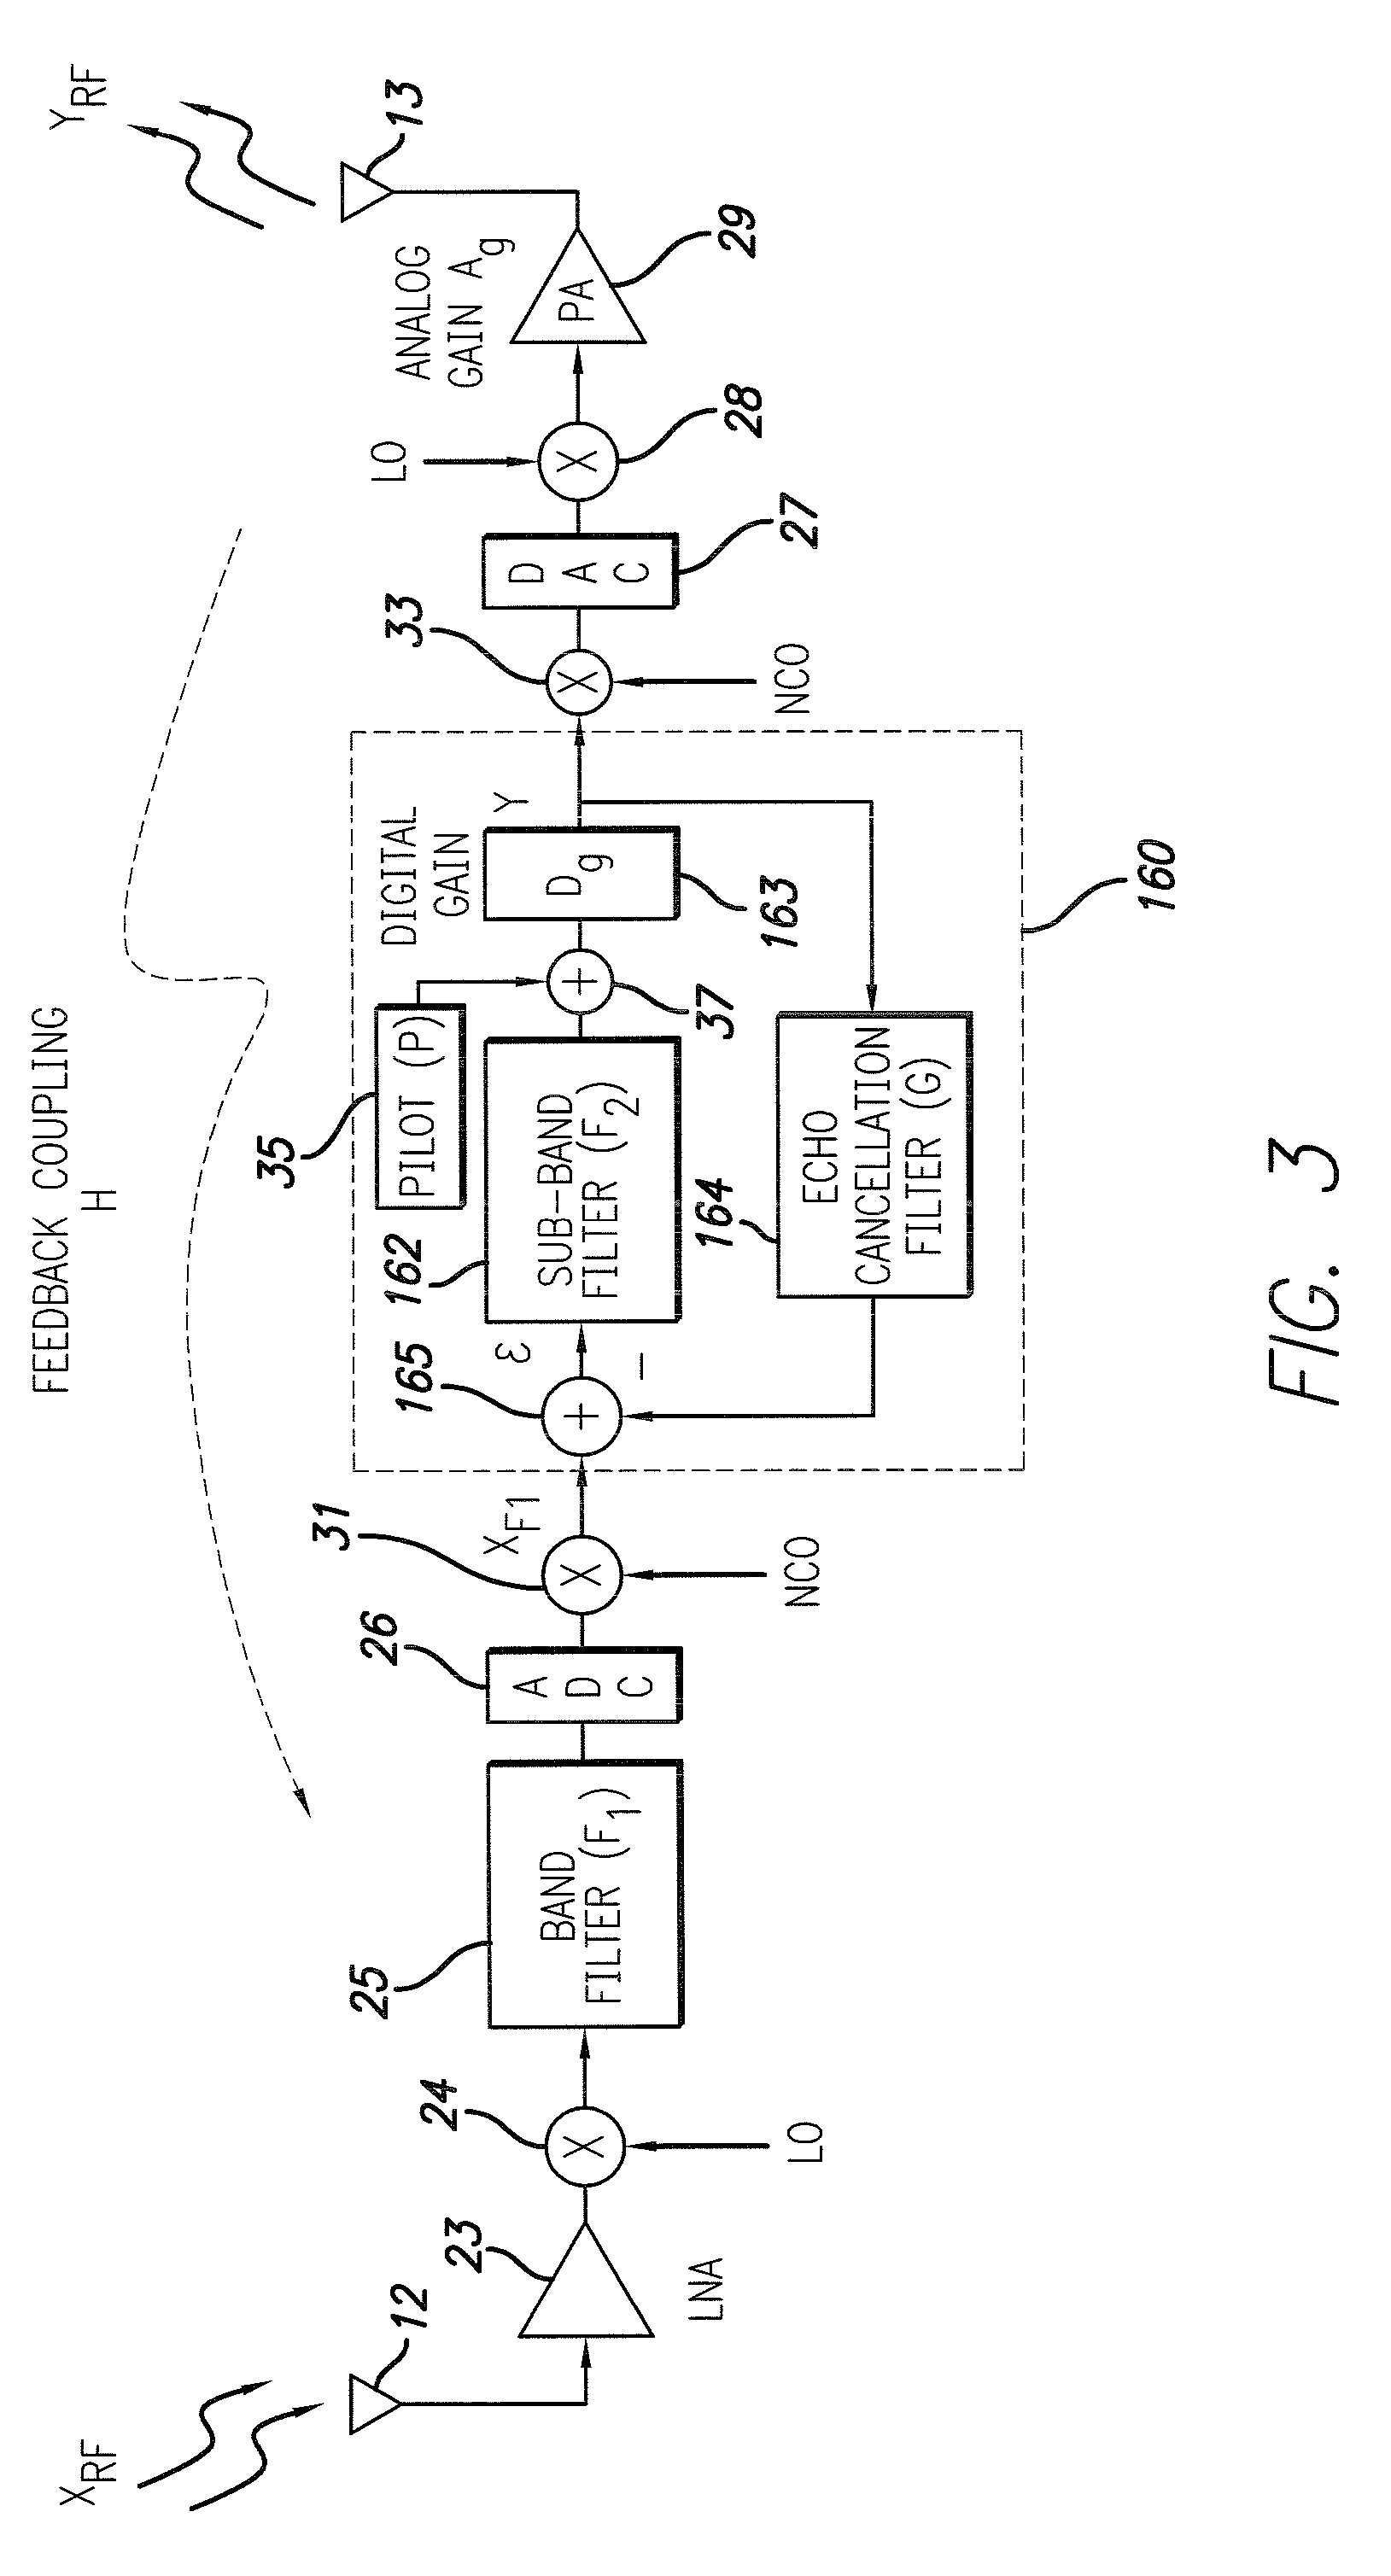 Adaptive echo cancellation for an on-frequency RF repeater with digital sub-band filtering